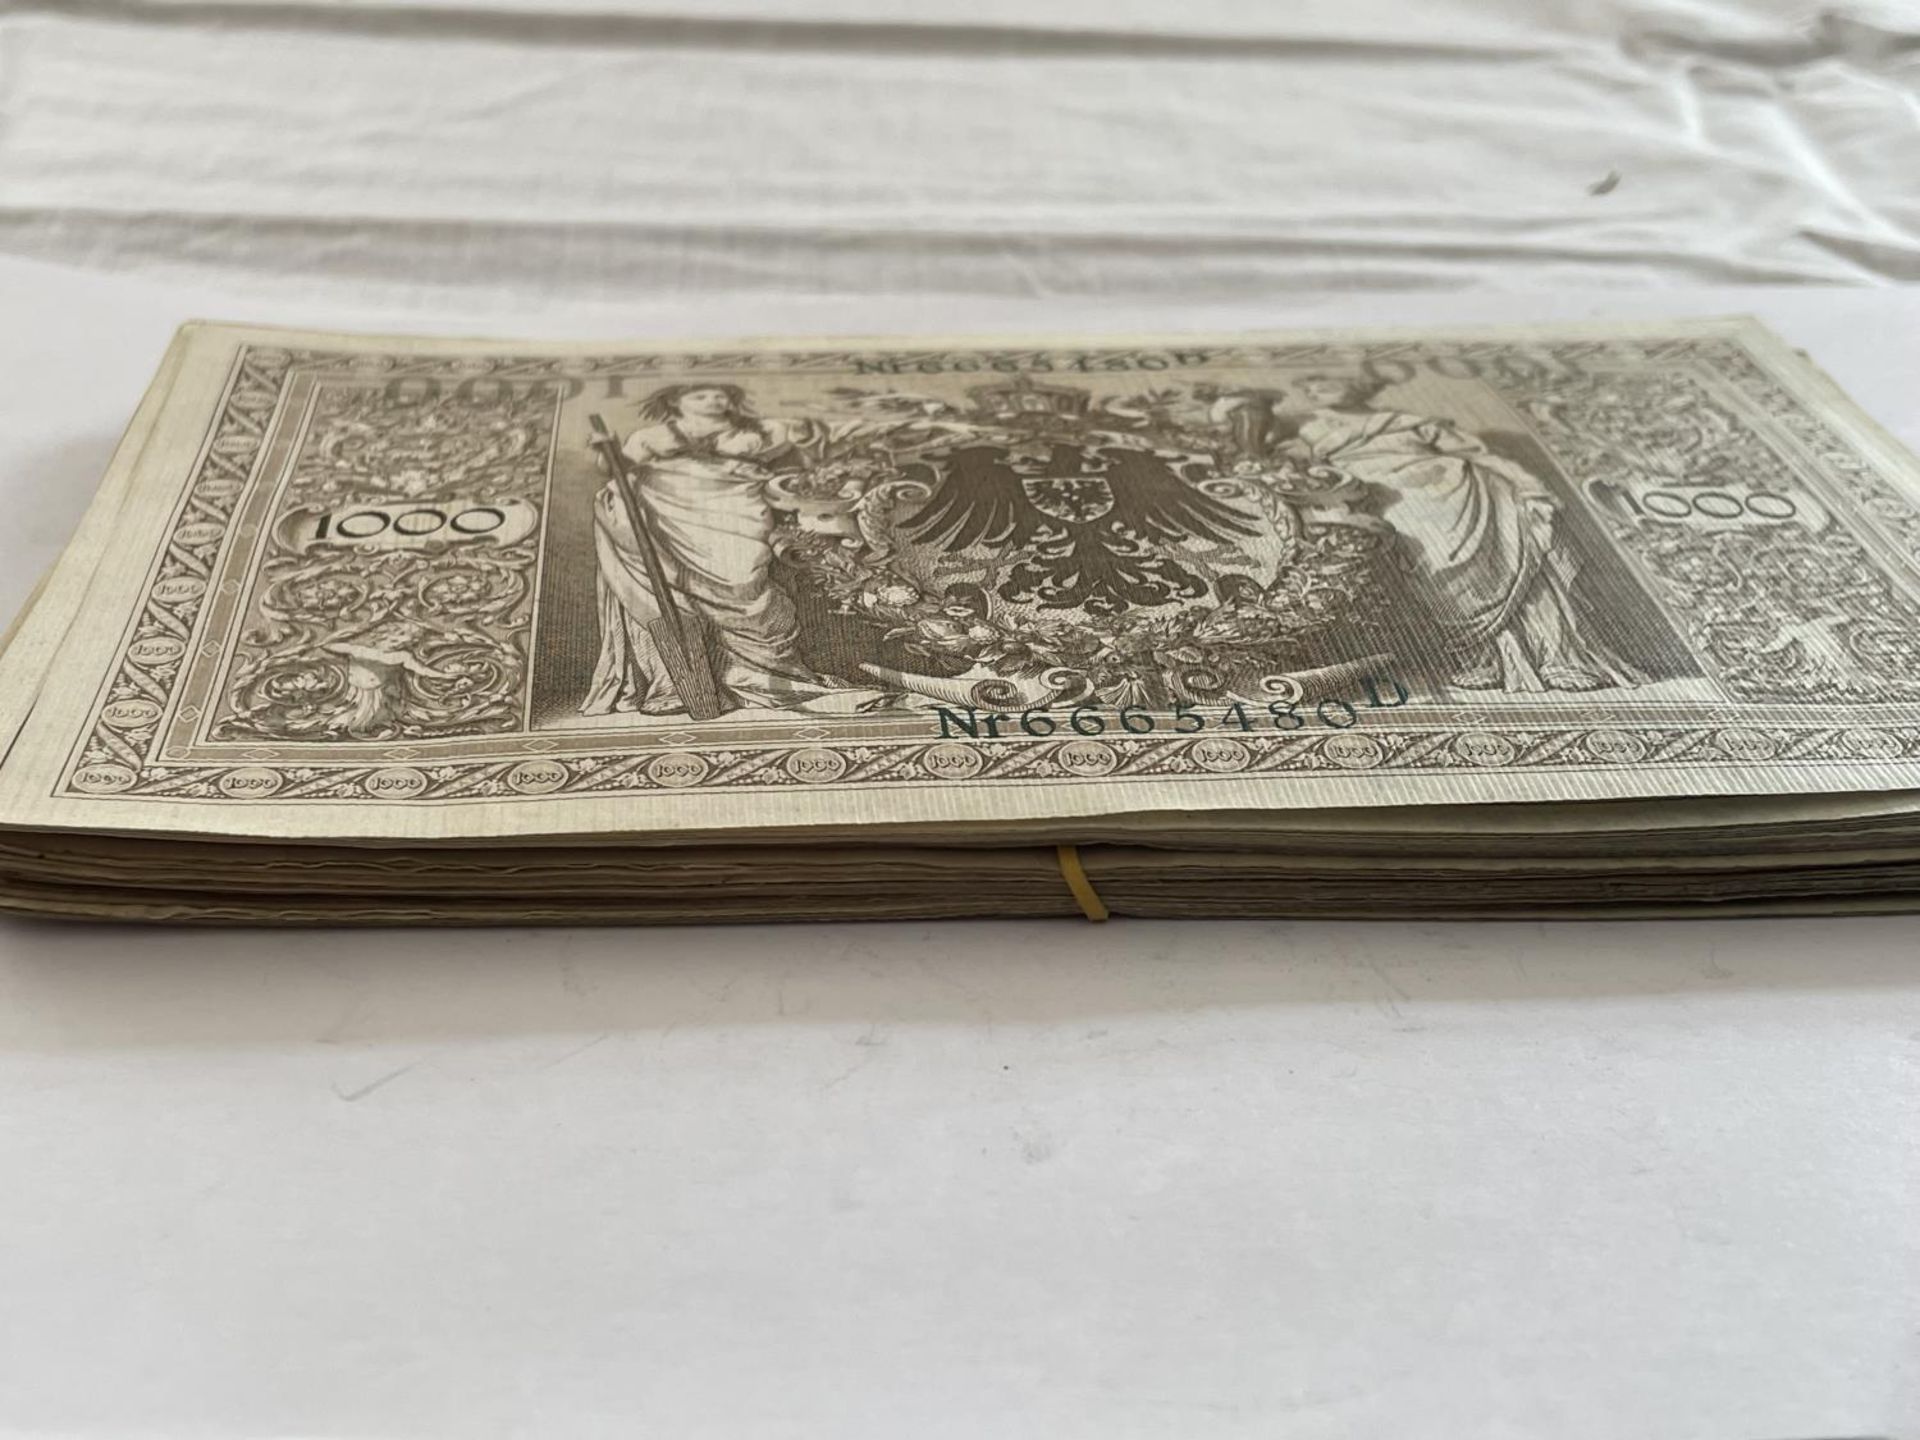 AN ENVELOPE CONTAINING A LARGE QUANTITY OF TAUSEND MARK GERMAN BANK NOTES, DATED BERLIN 21 APRIL - Image 3 of 3